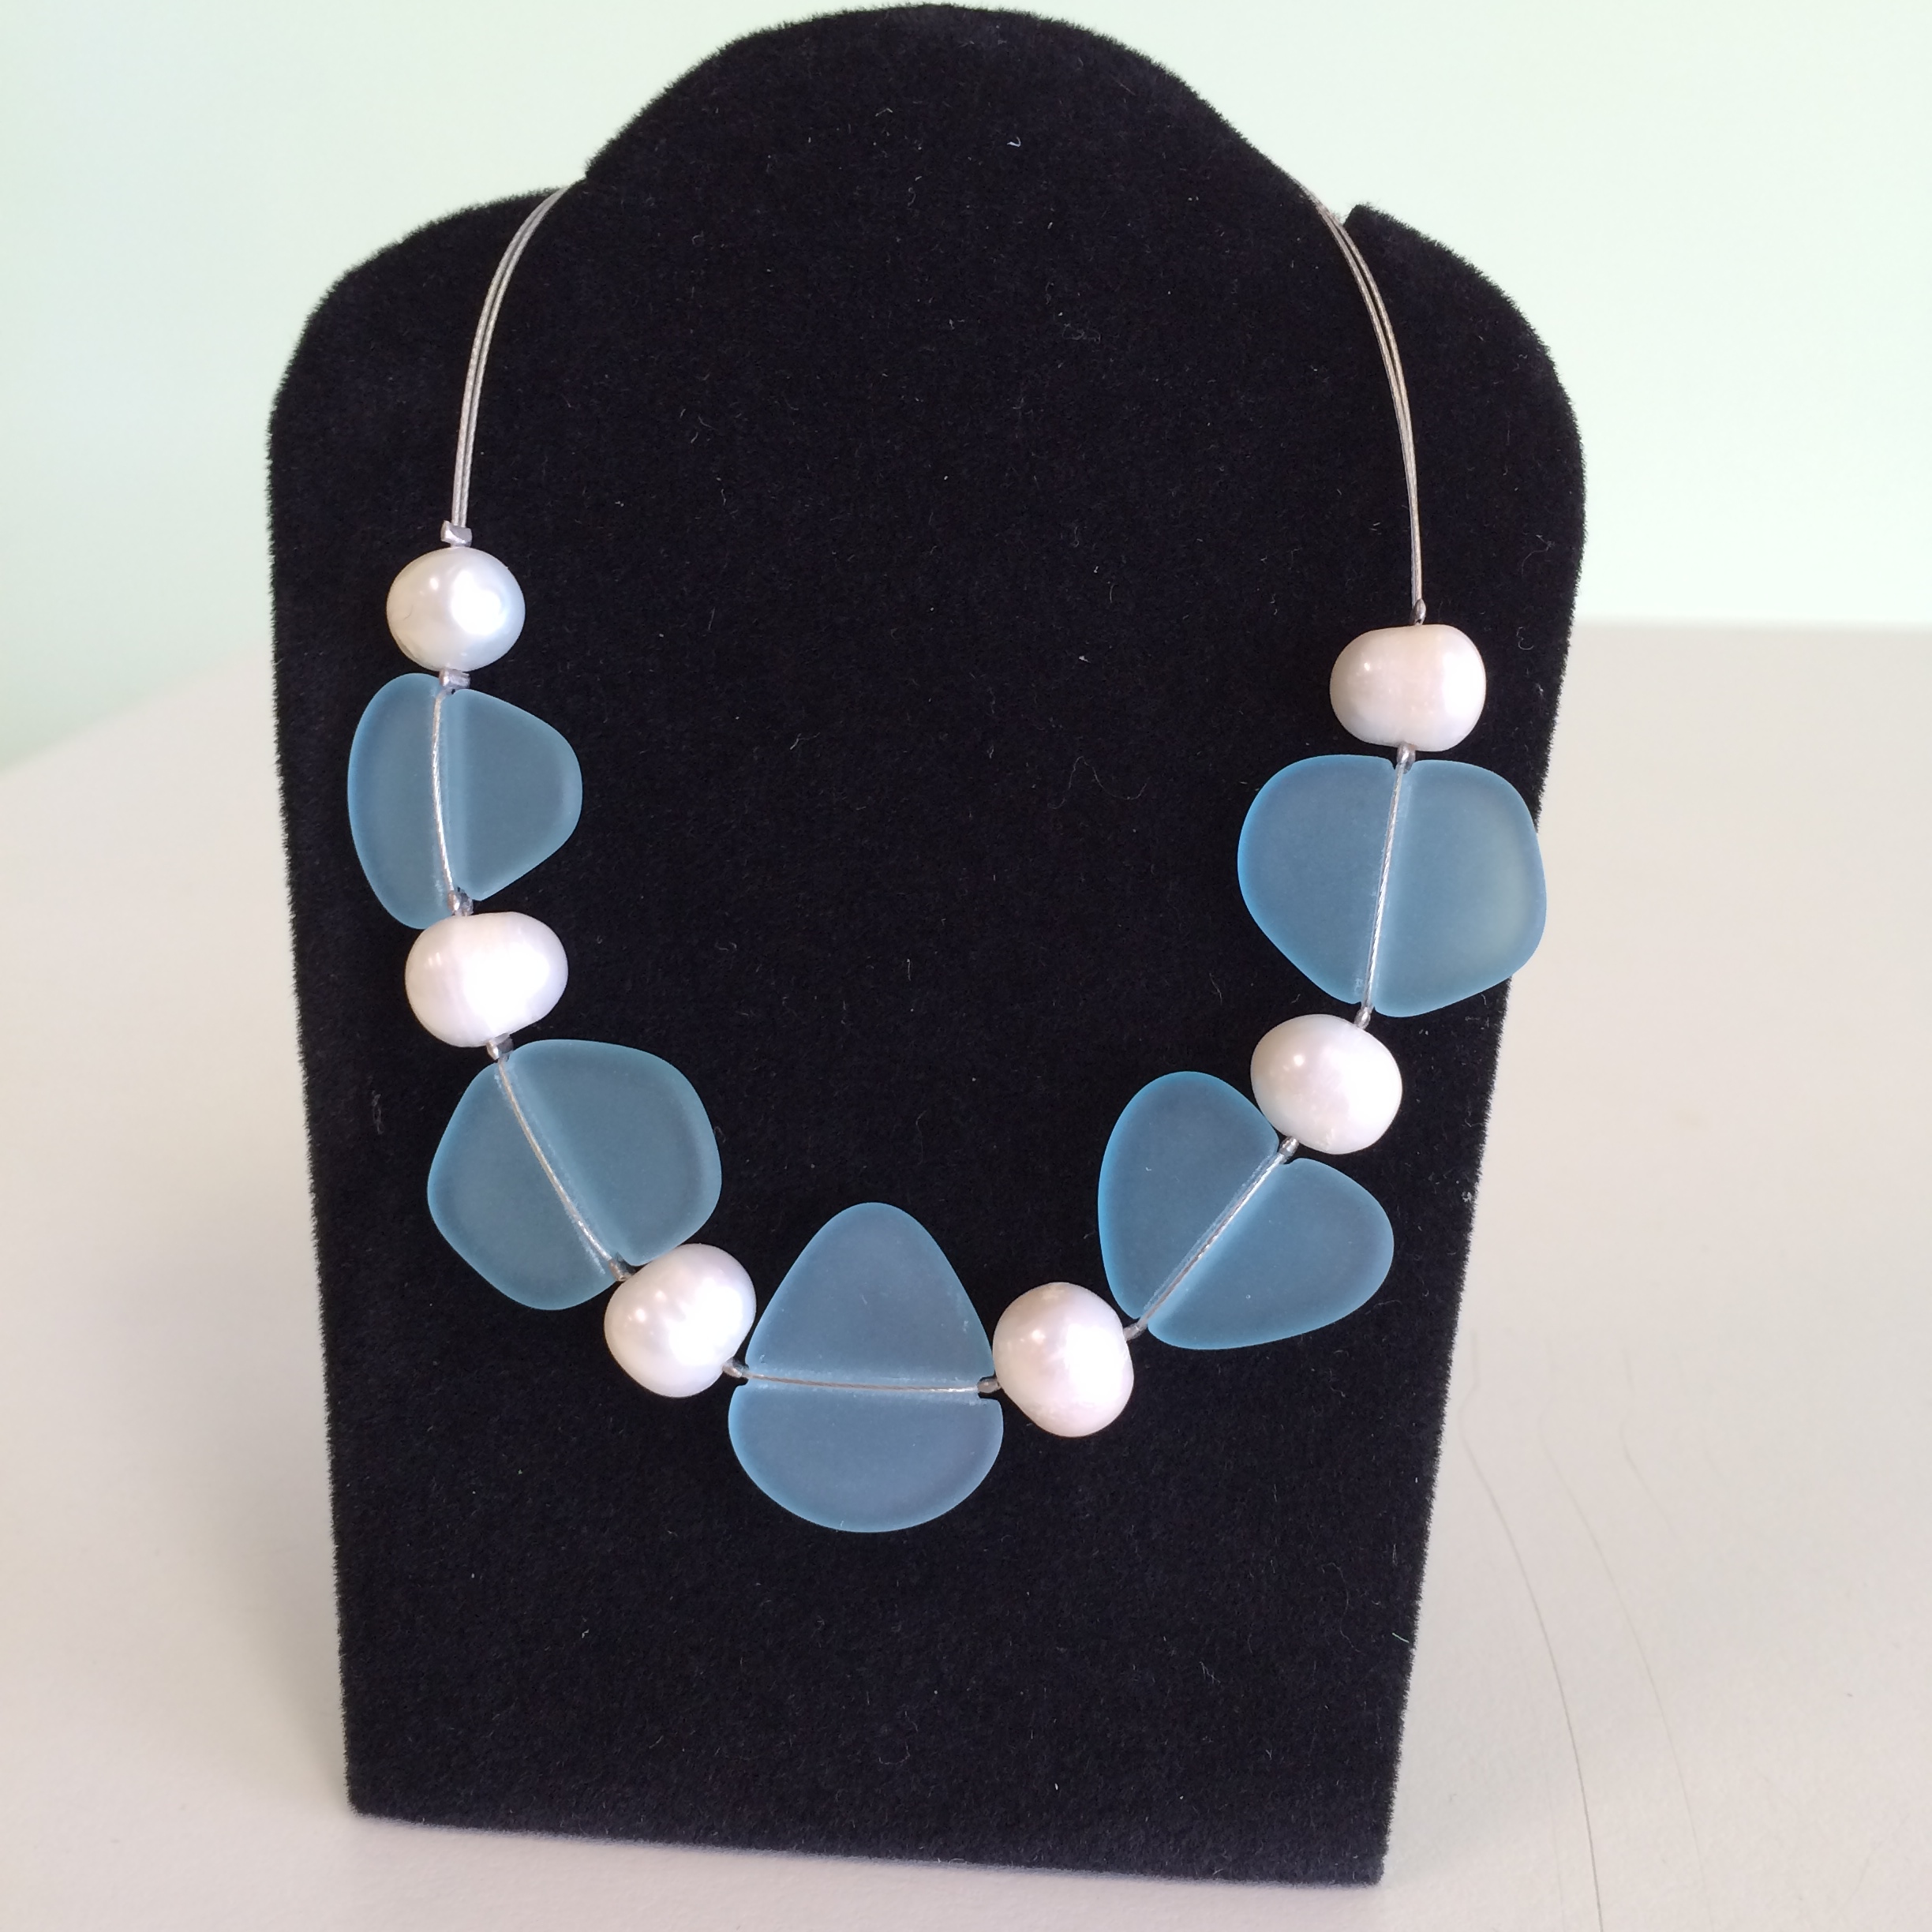 Light Aqua Sea Glass Necklace with Pearls